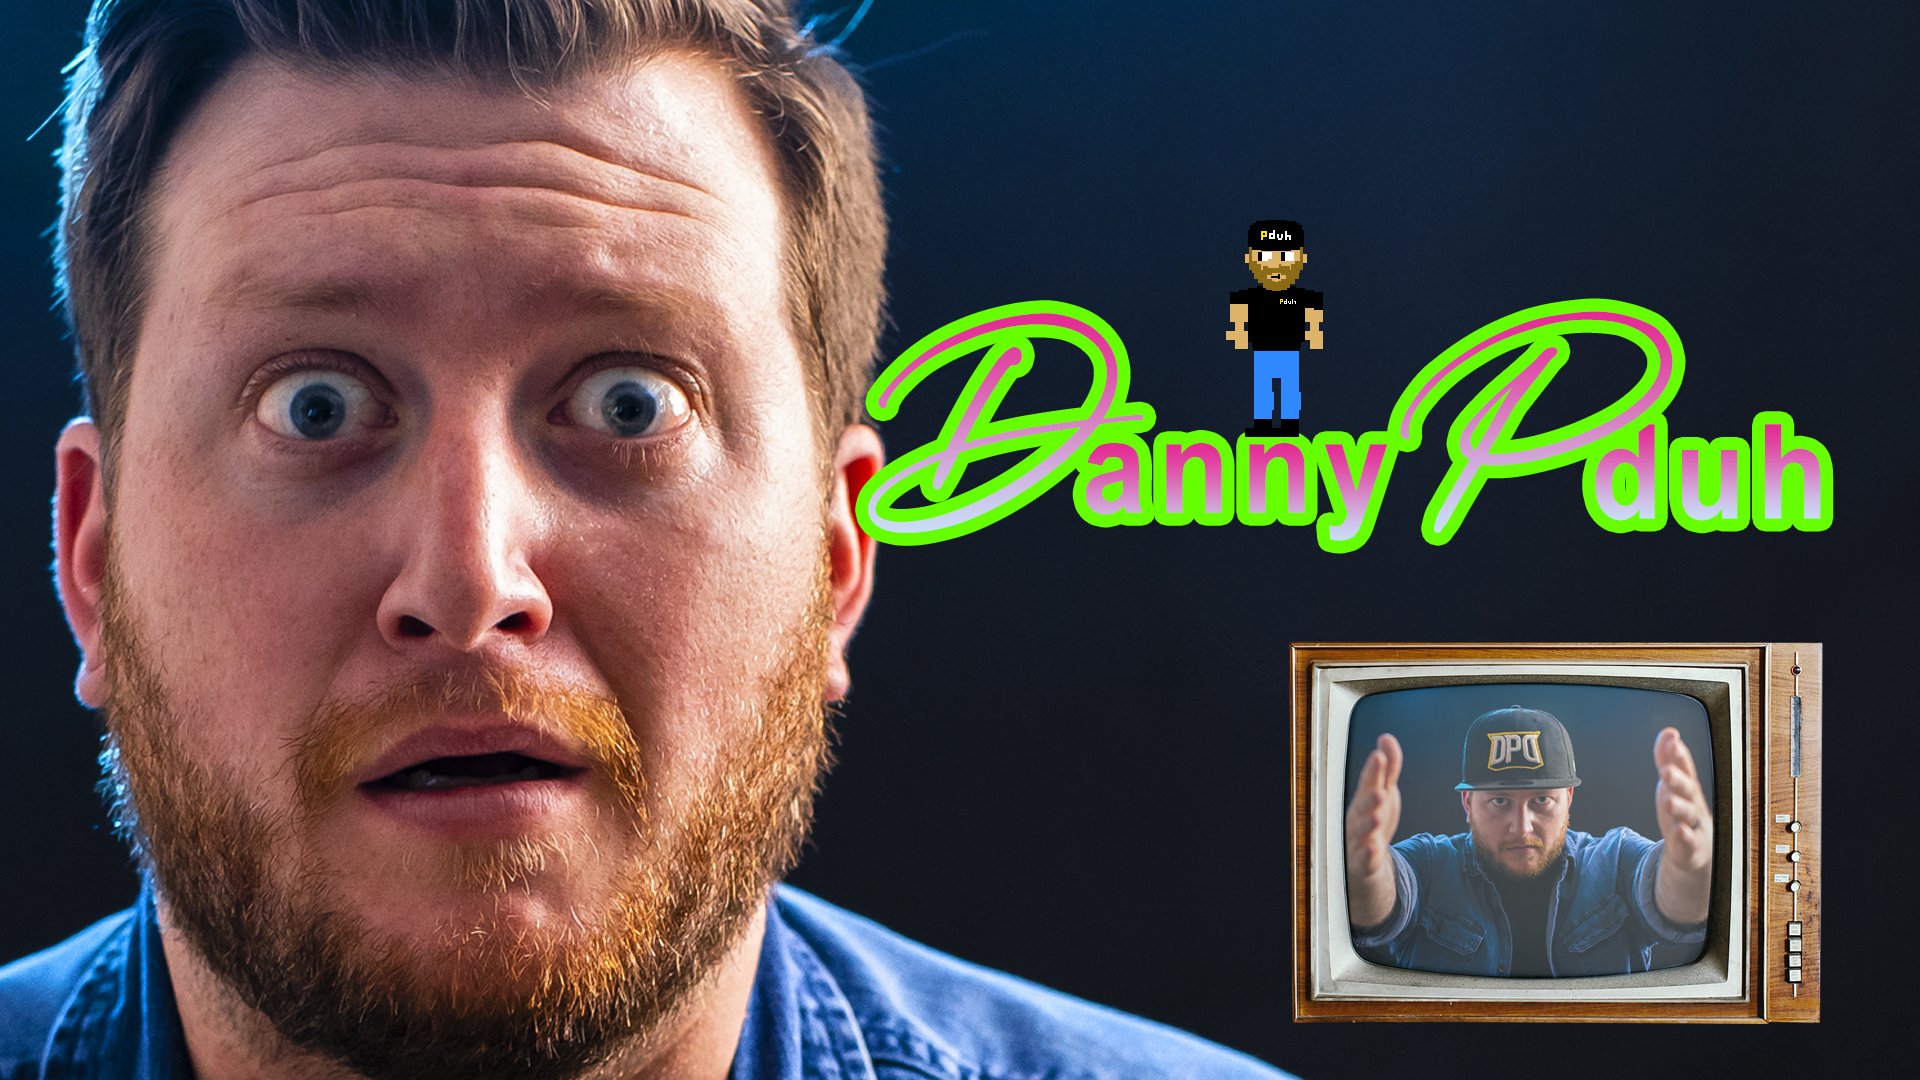 DannyPduh Twitch Opener Youtube Cover.jpg